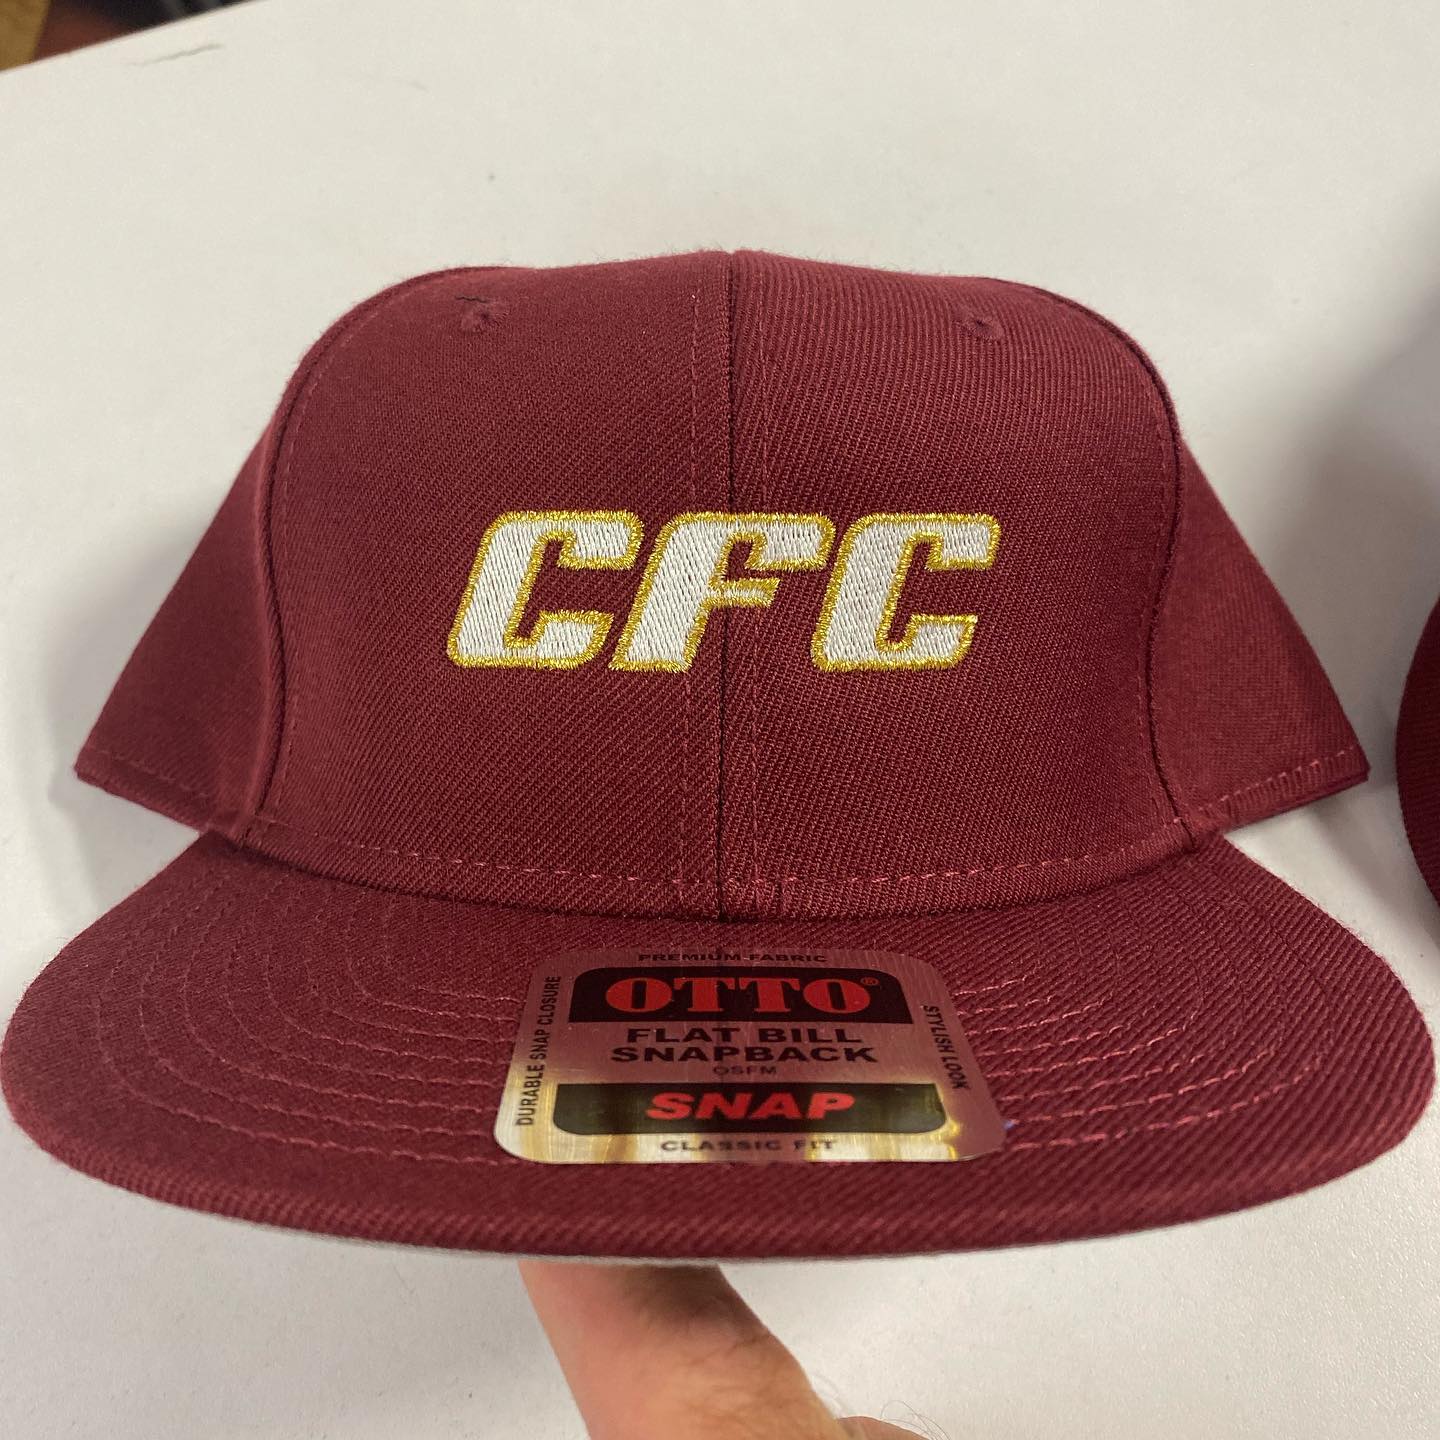 Another hat coming in hot!! Shoutout to CFC and Ty Redding for this cool color combo.